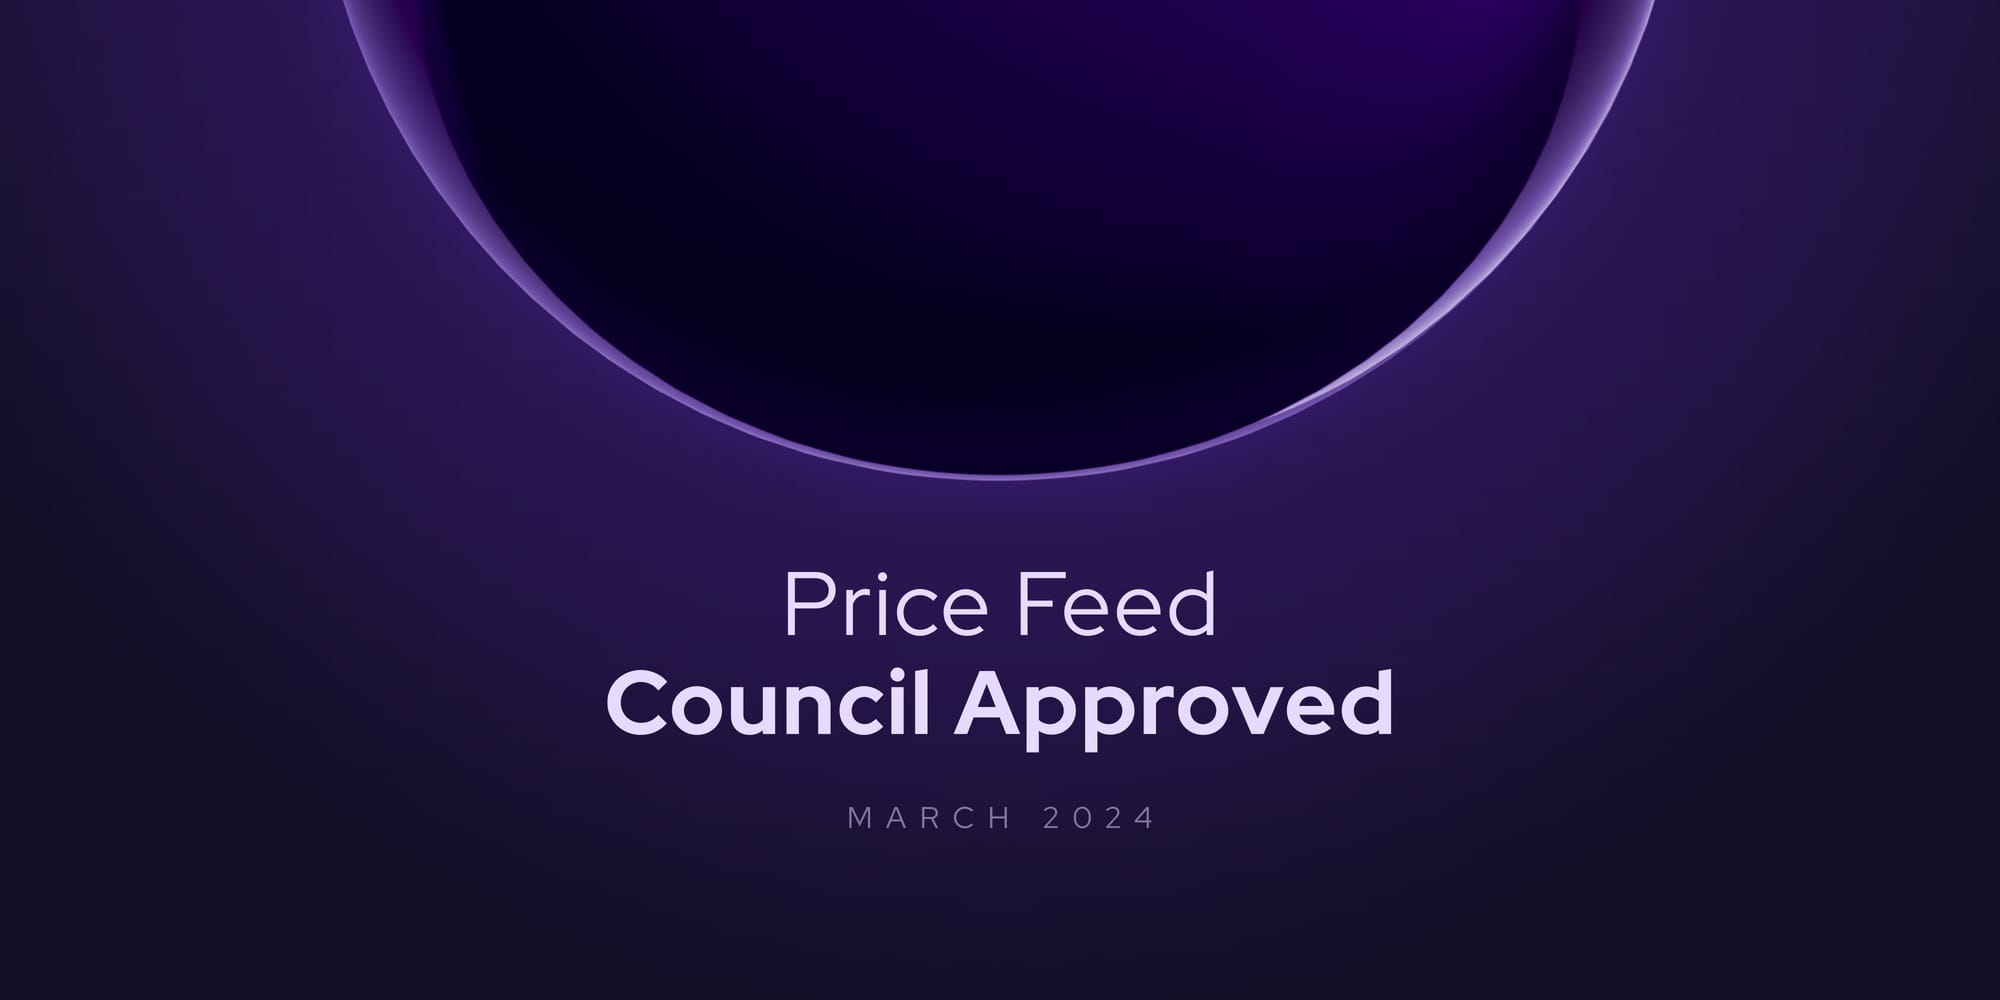 The Launch of the Inaugural Price Feed Council | Mar 2024